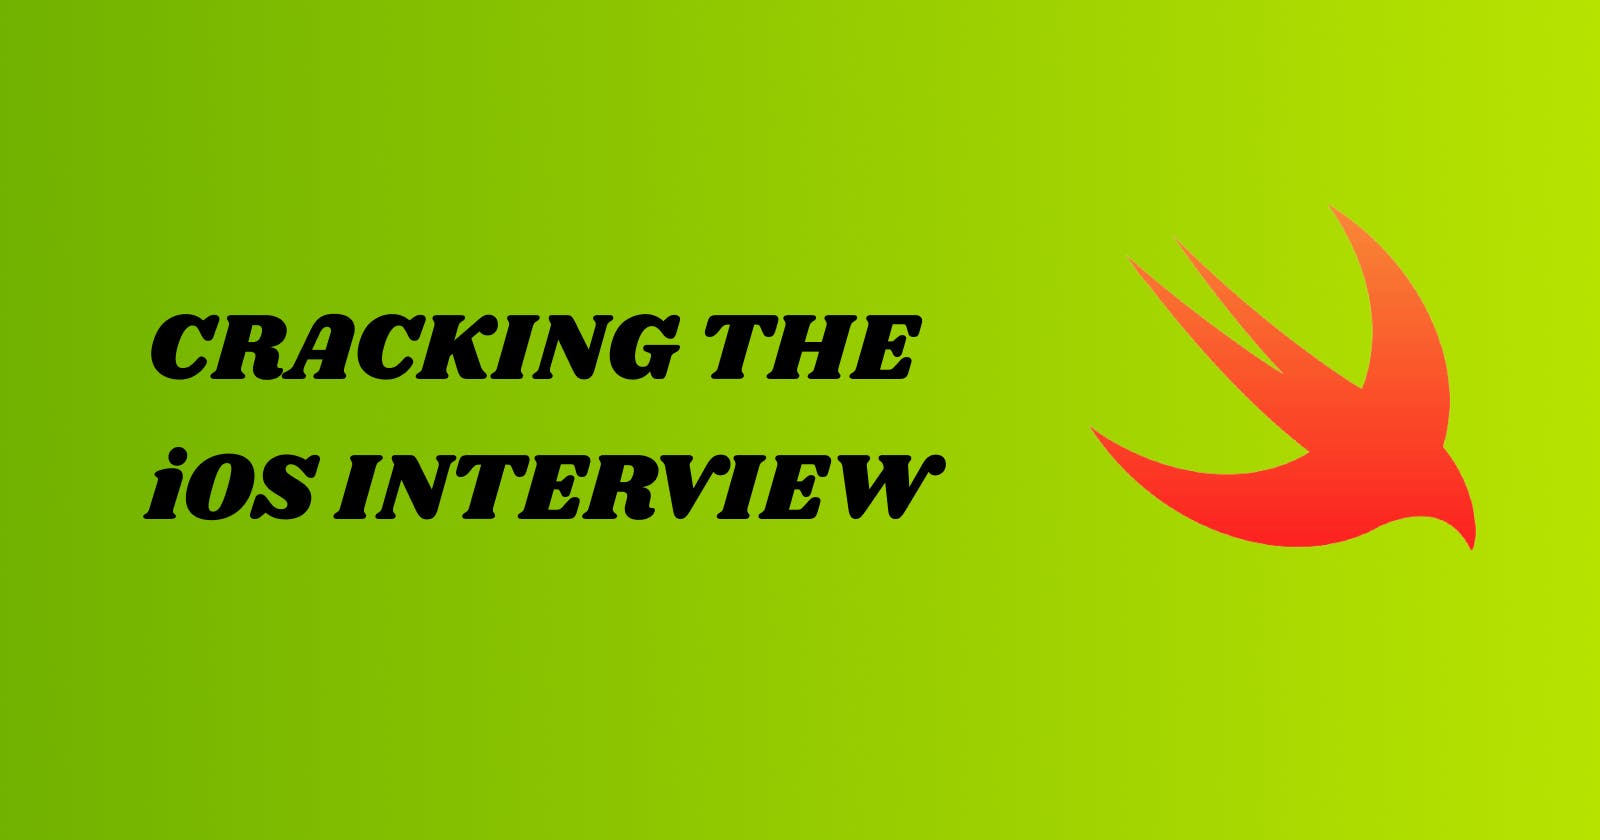 Cracking the iOS Interview: Array Questions #1 - Is Unique